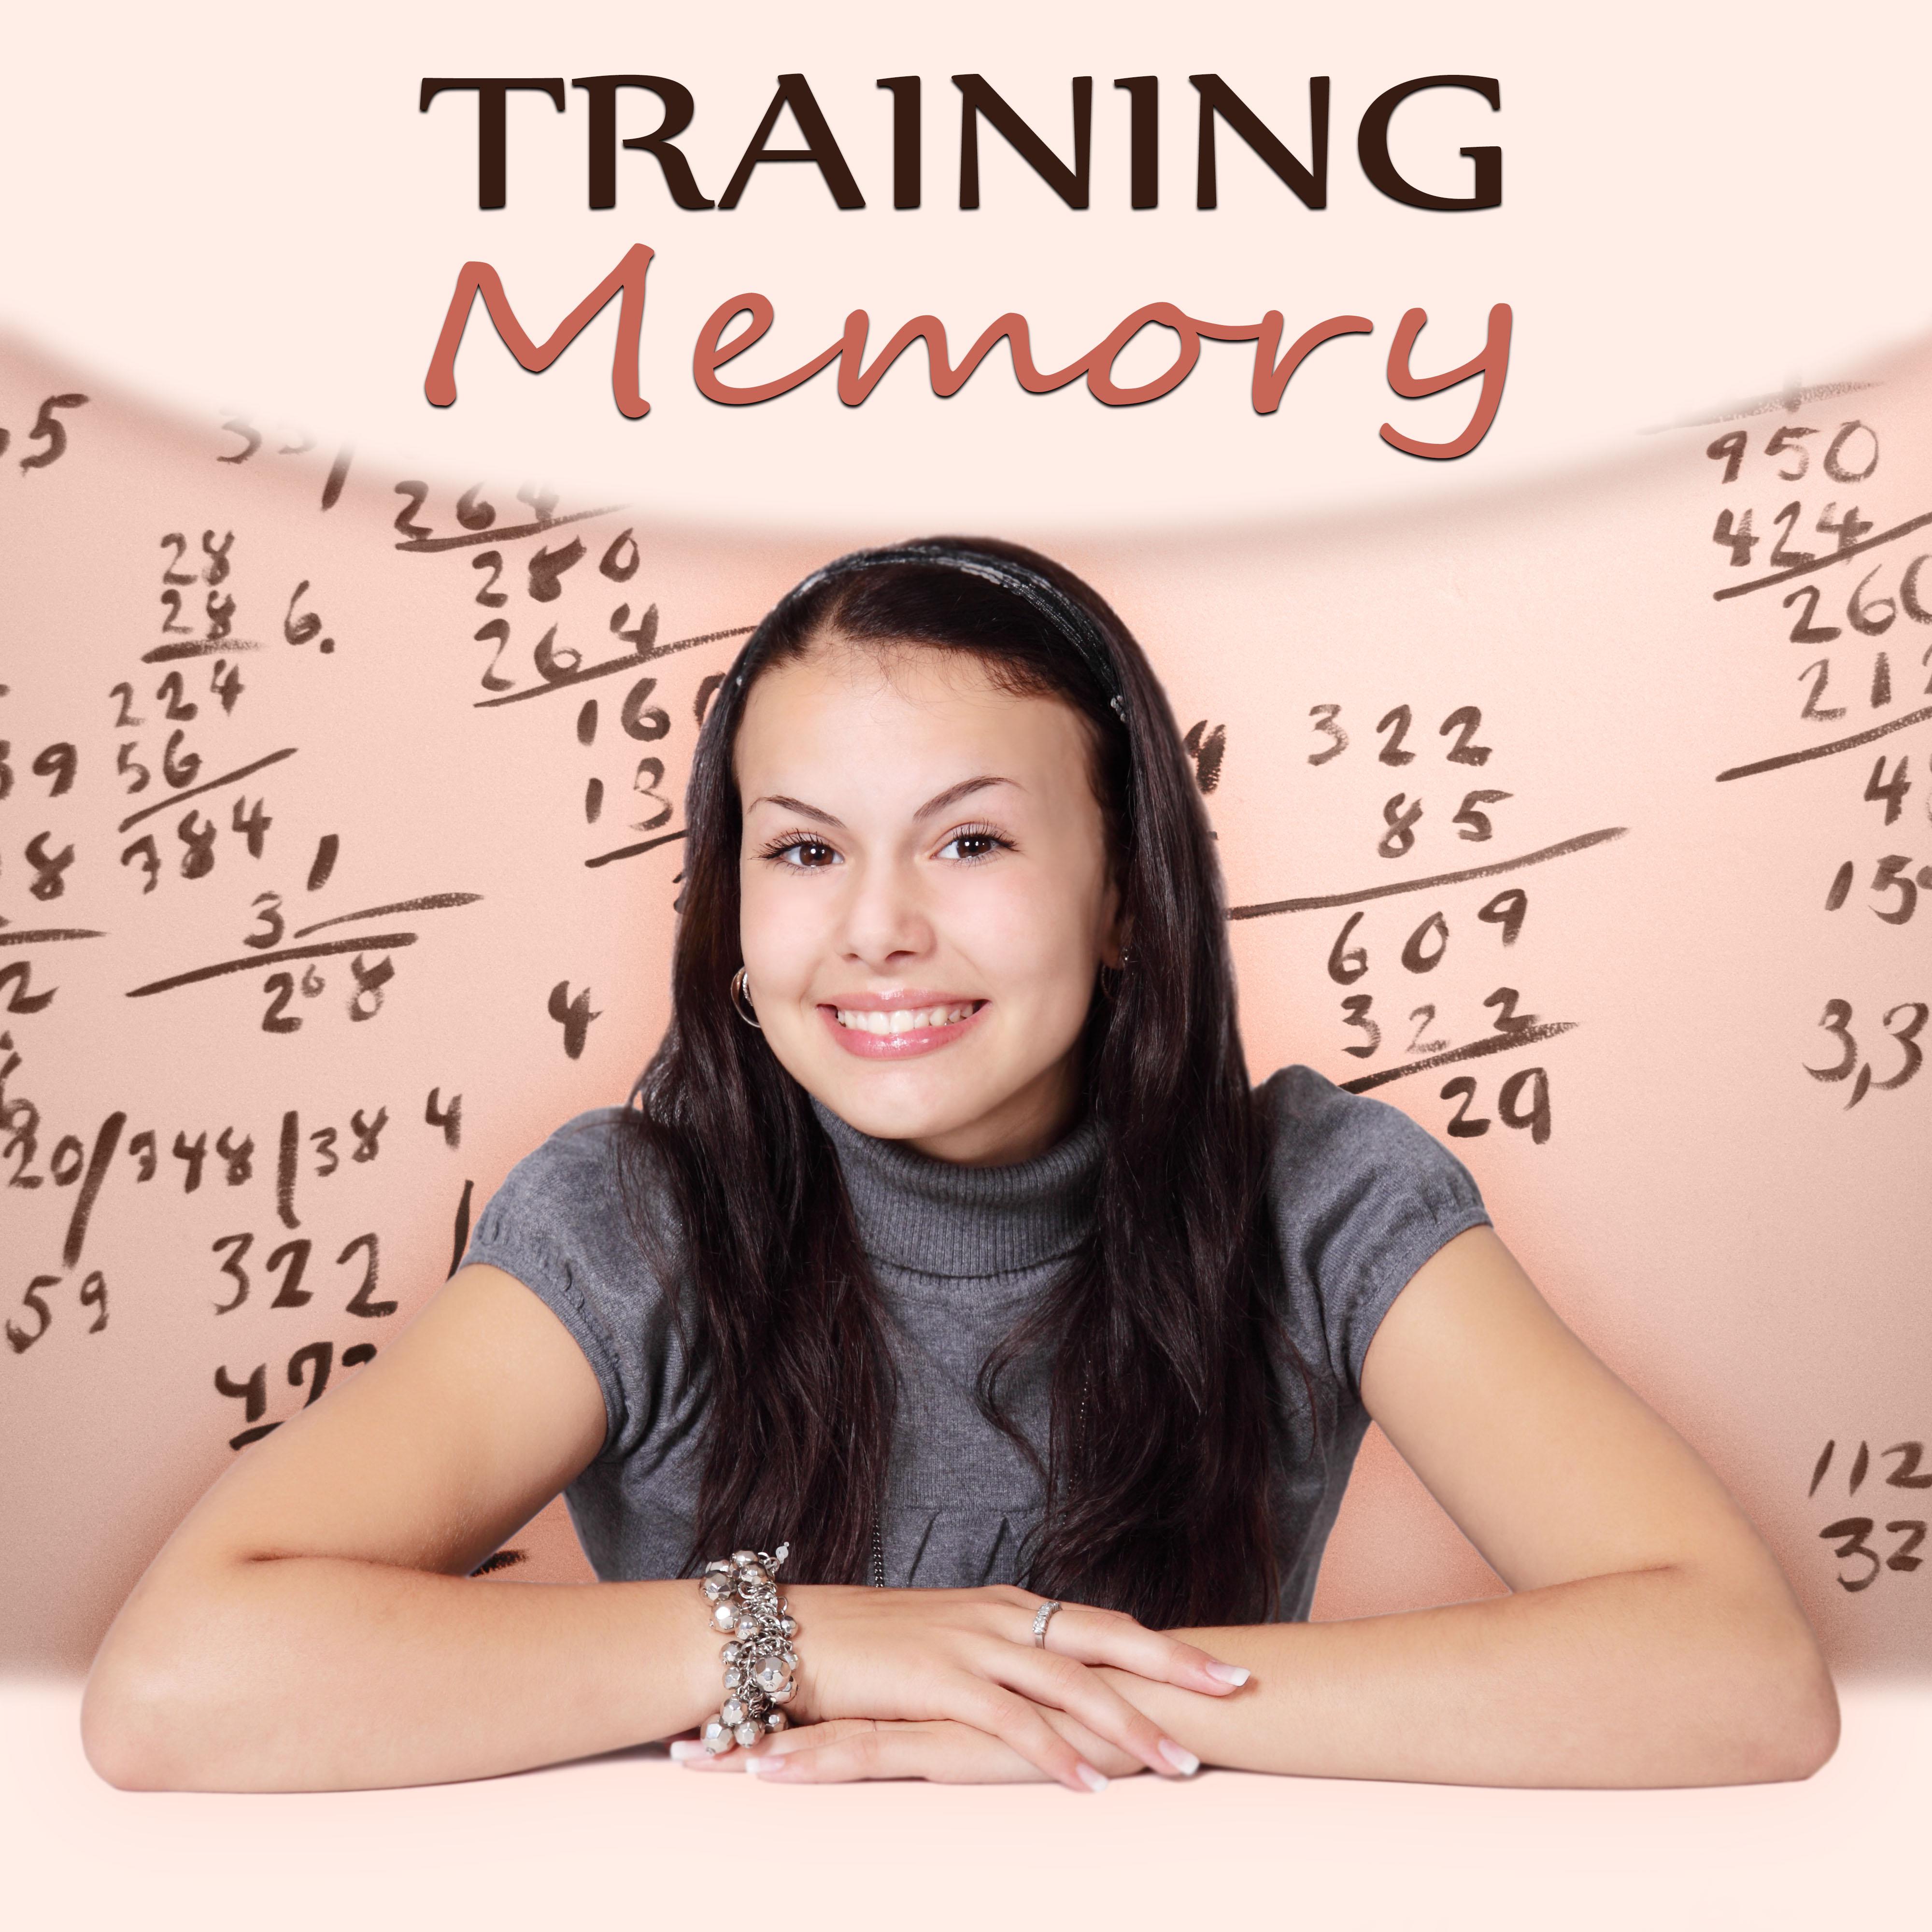 Training Memory - Improve Memory, Nature Sounds, Mind Power, Peace of Mind, Brain Training, Creative Thinking, Increase Concentration